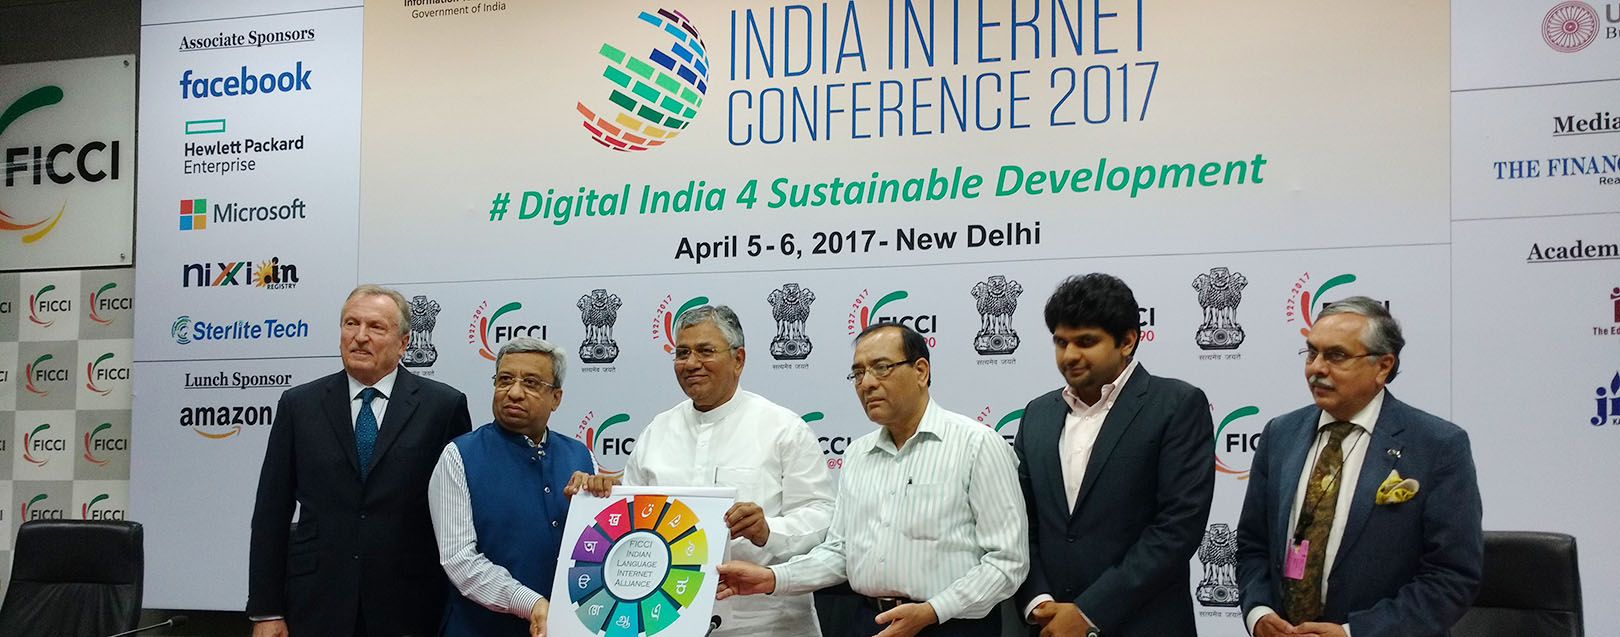 Our aim is to make India a zero net IT import country by 2020: IT Minister